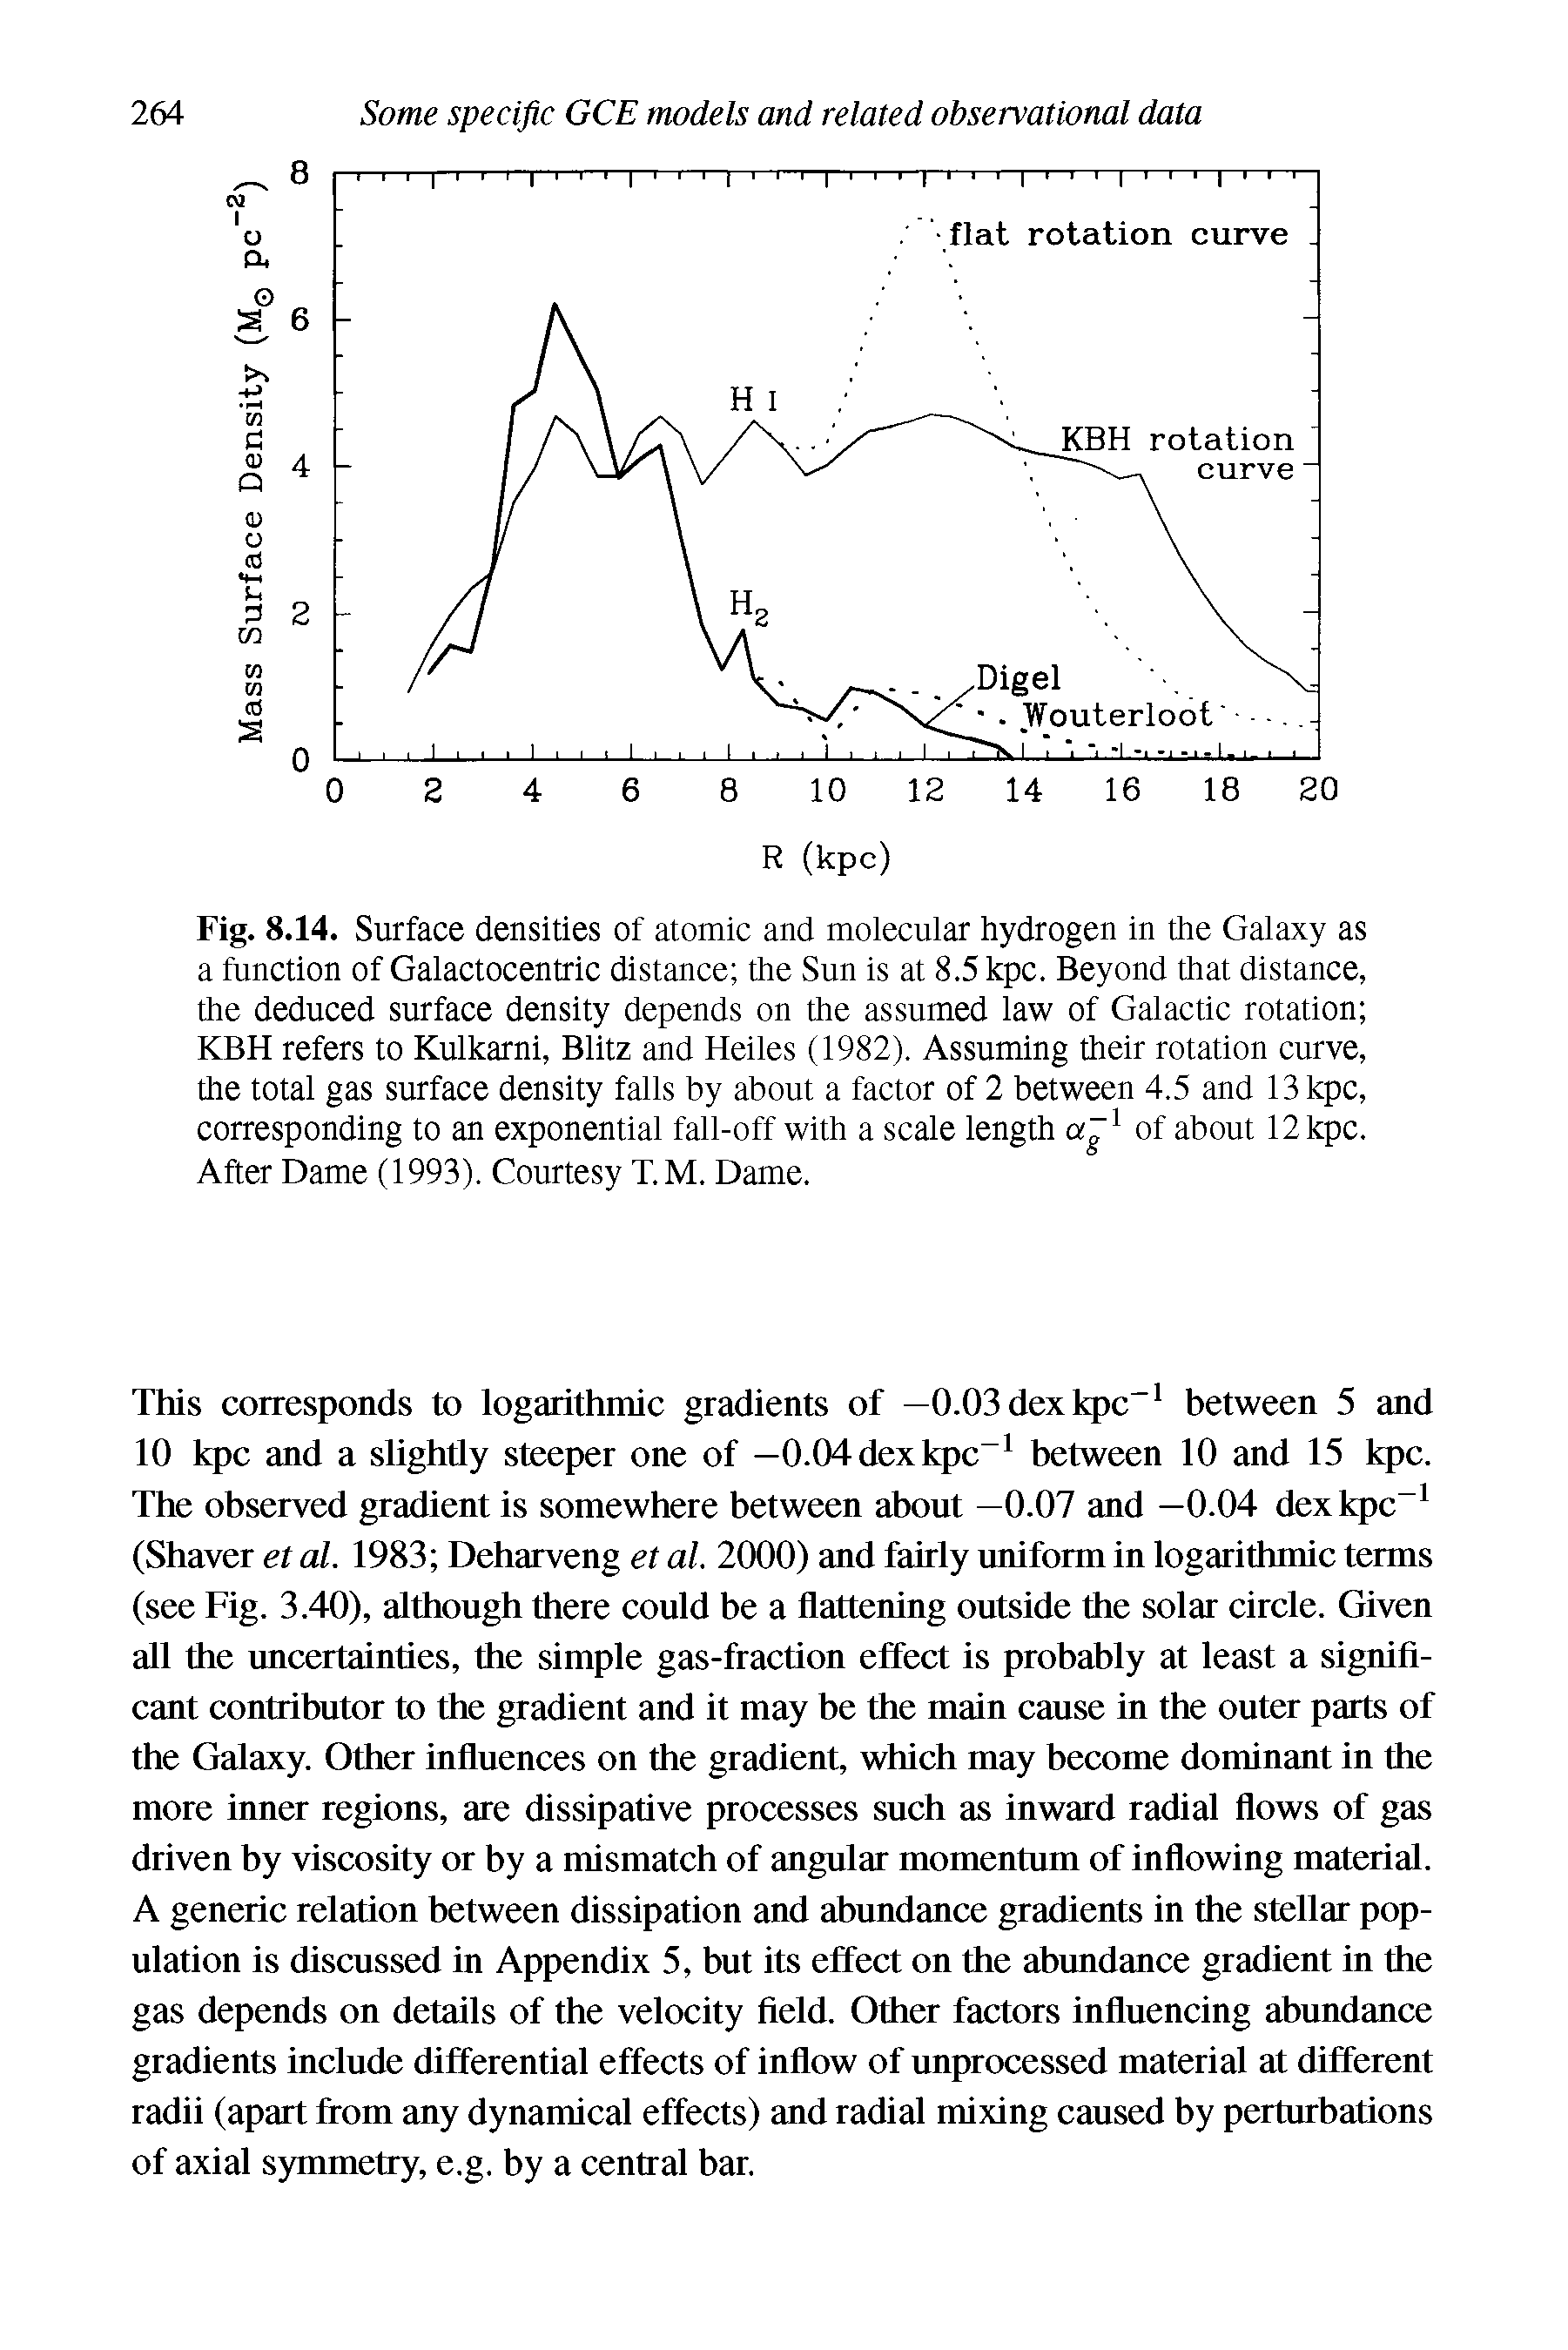 Fig. 8.14. Surface densities of atomic and molecular hydrogen in the Galaxy as a function of Galactocentric distance the Sun is at 8.5 kpc. Beyond that distance, the deduced surface density depends on the assumed law of Galactic rotation KBH refers to Kulkarni, Blitz and Heiles (1982). Assuming their rotation curve, the total gas surface density falls by about a factor of 2 between 4.5 and 13 kpc, corresponding to an exponential fall-off with a scale length a l of about 12 kpc. After Dame (1993). Courtesy T.M. Dame.